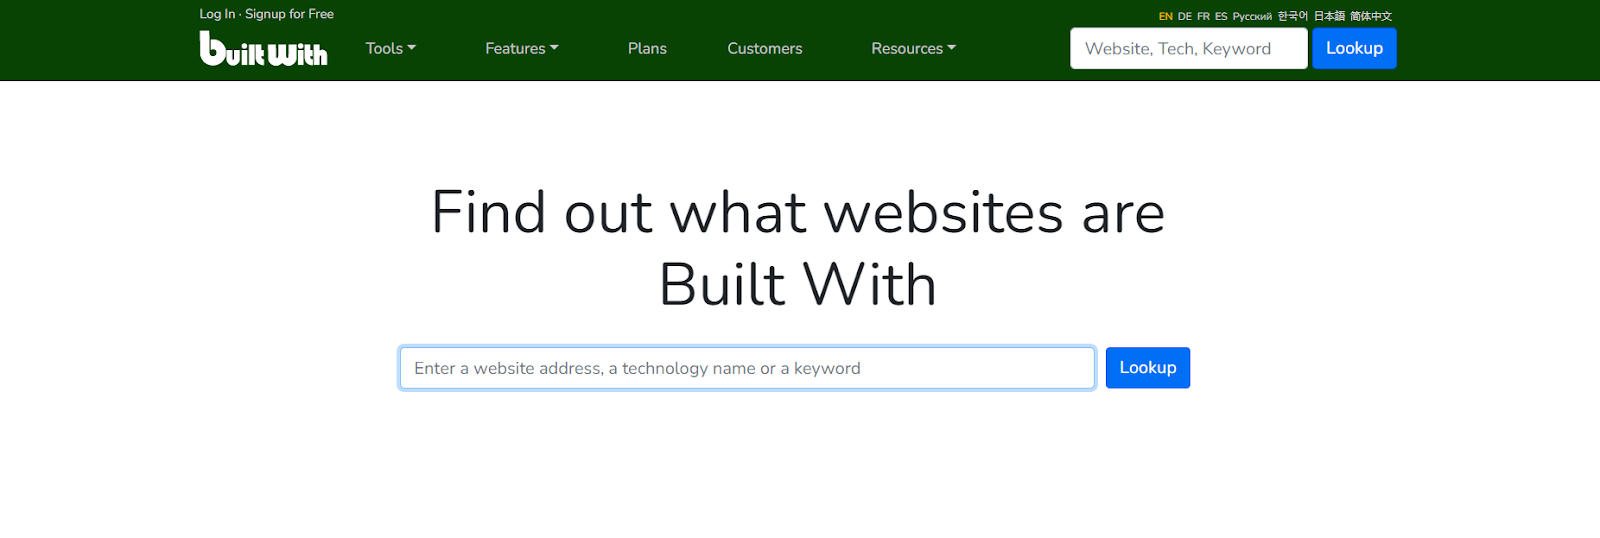 Builtwith website to find out what websites are developed on magento